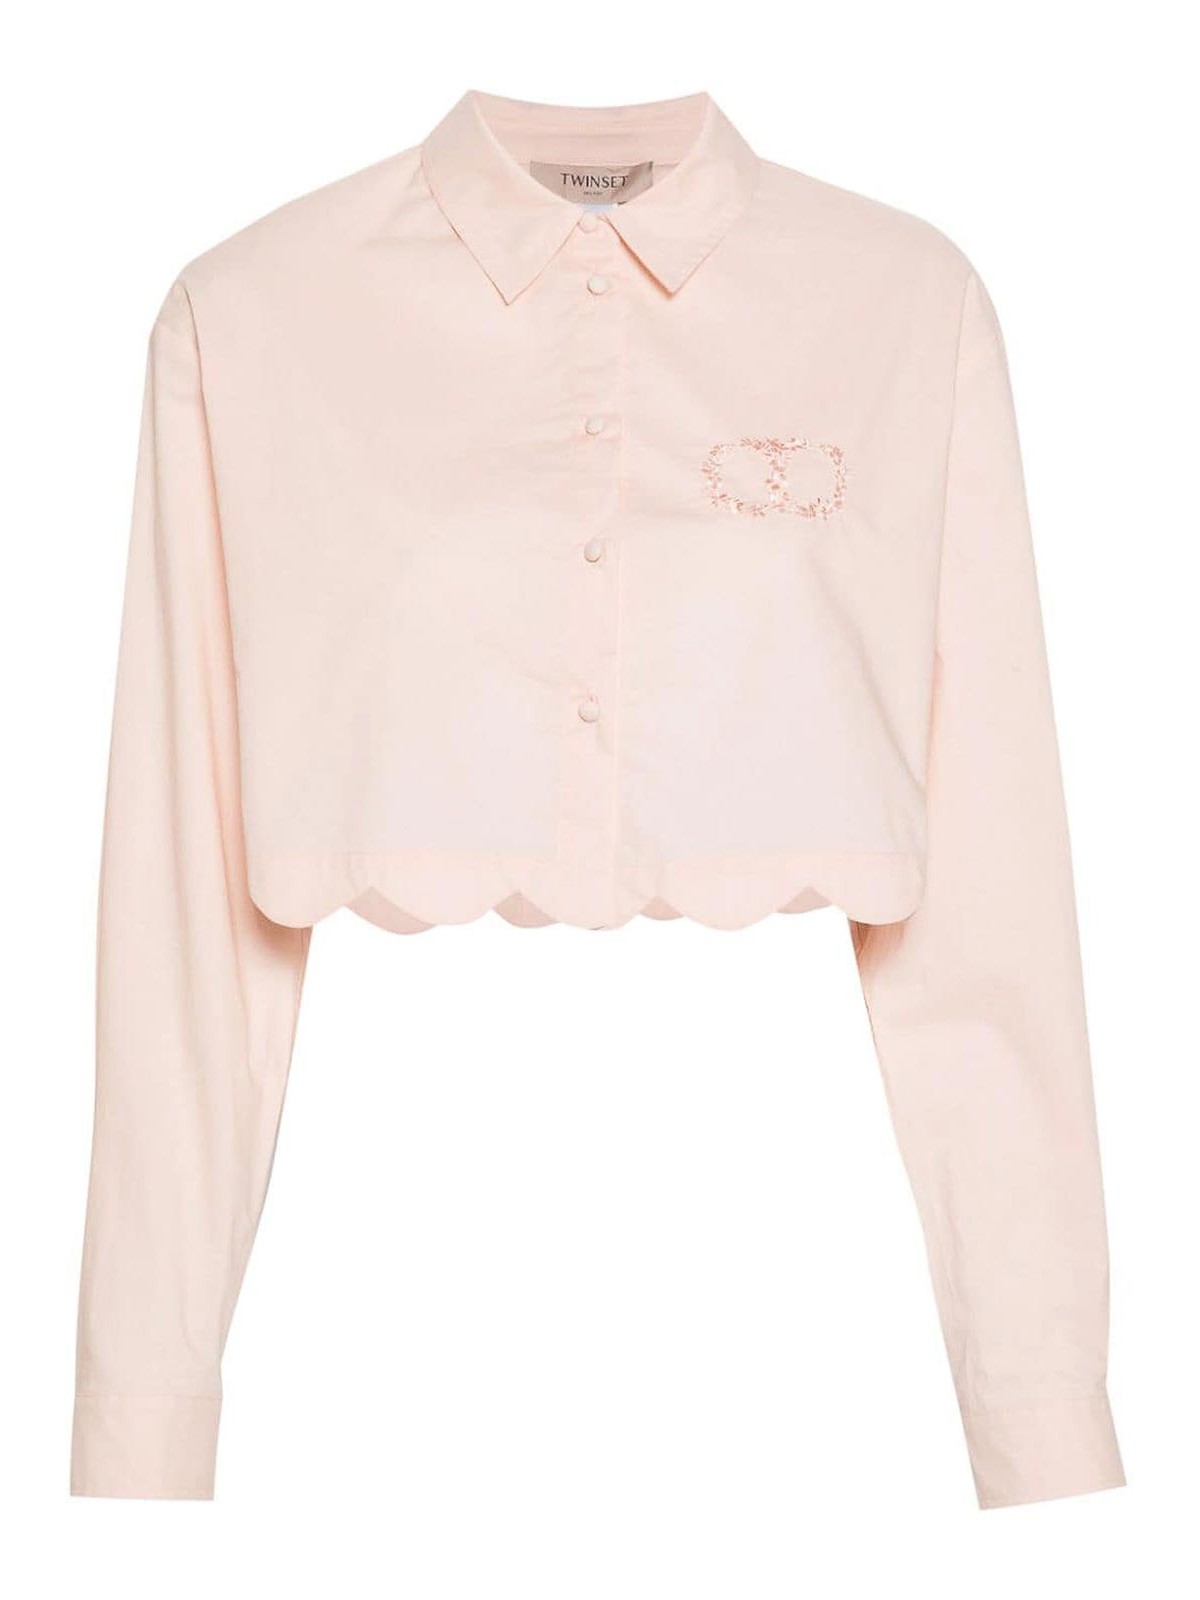 Twinset Shirt With Pleated Detail In Nude & Neutrals